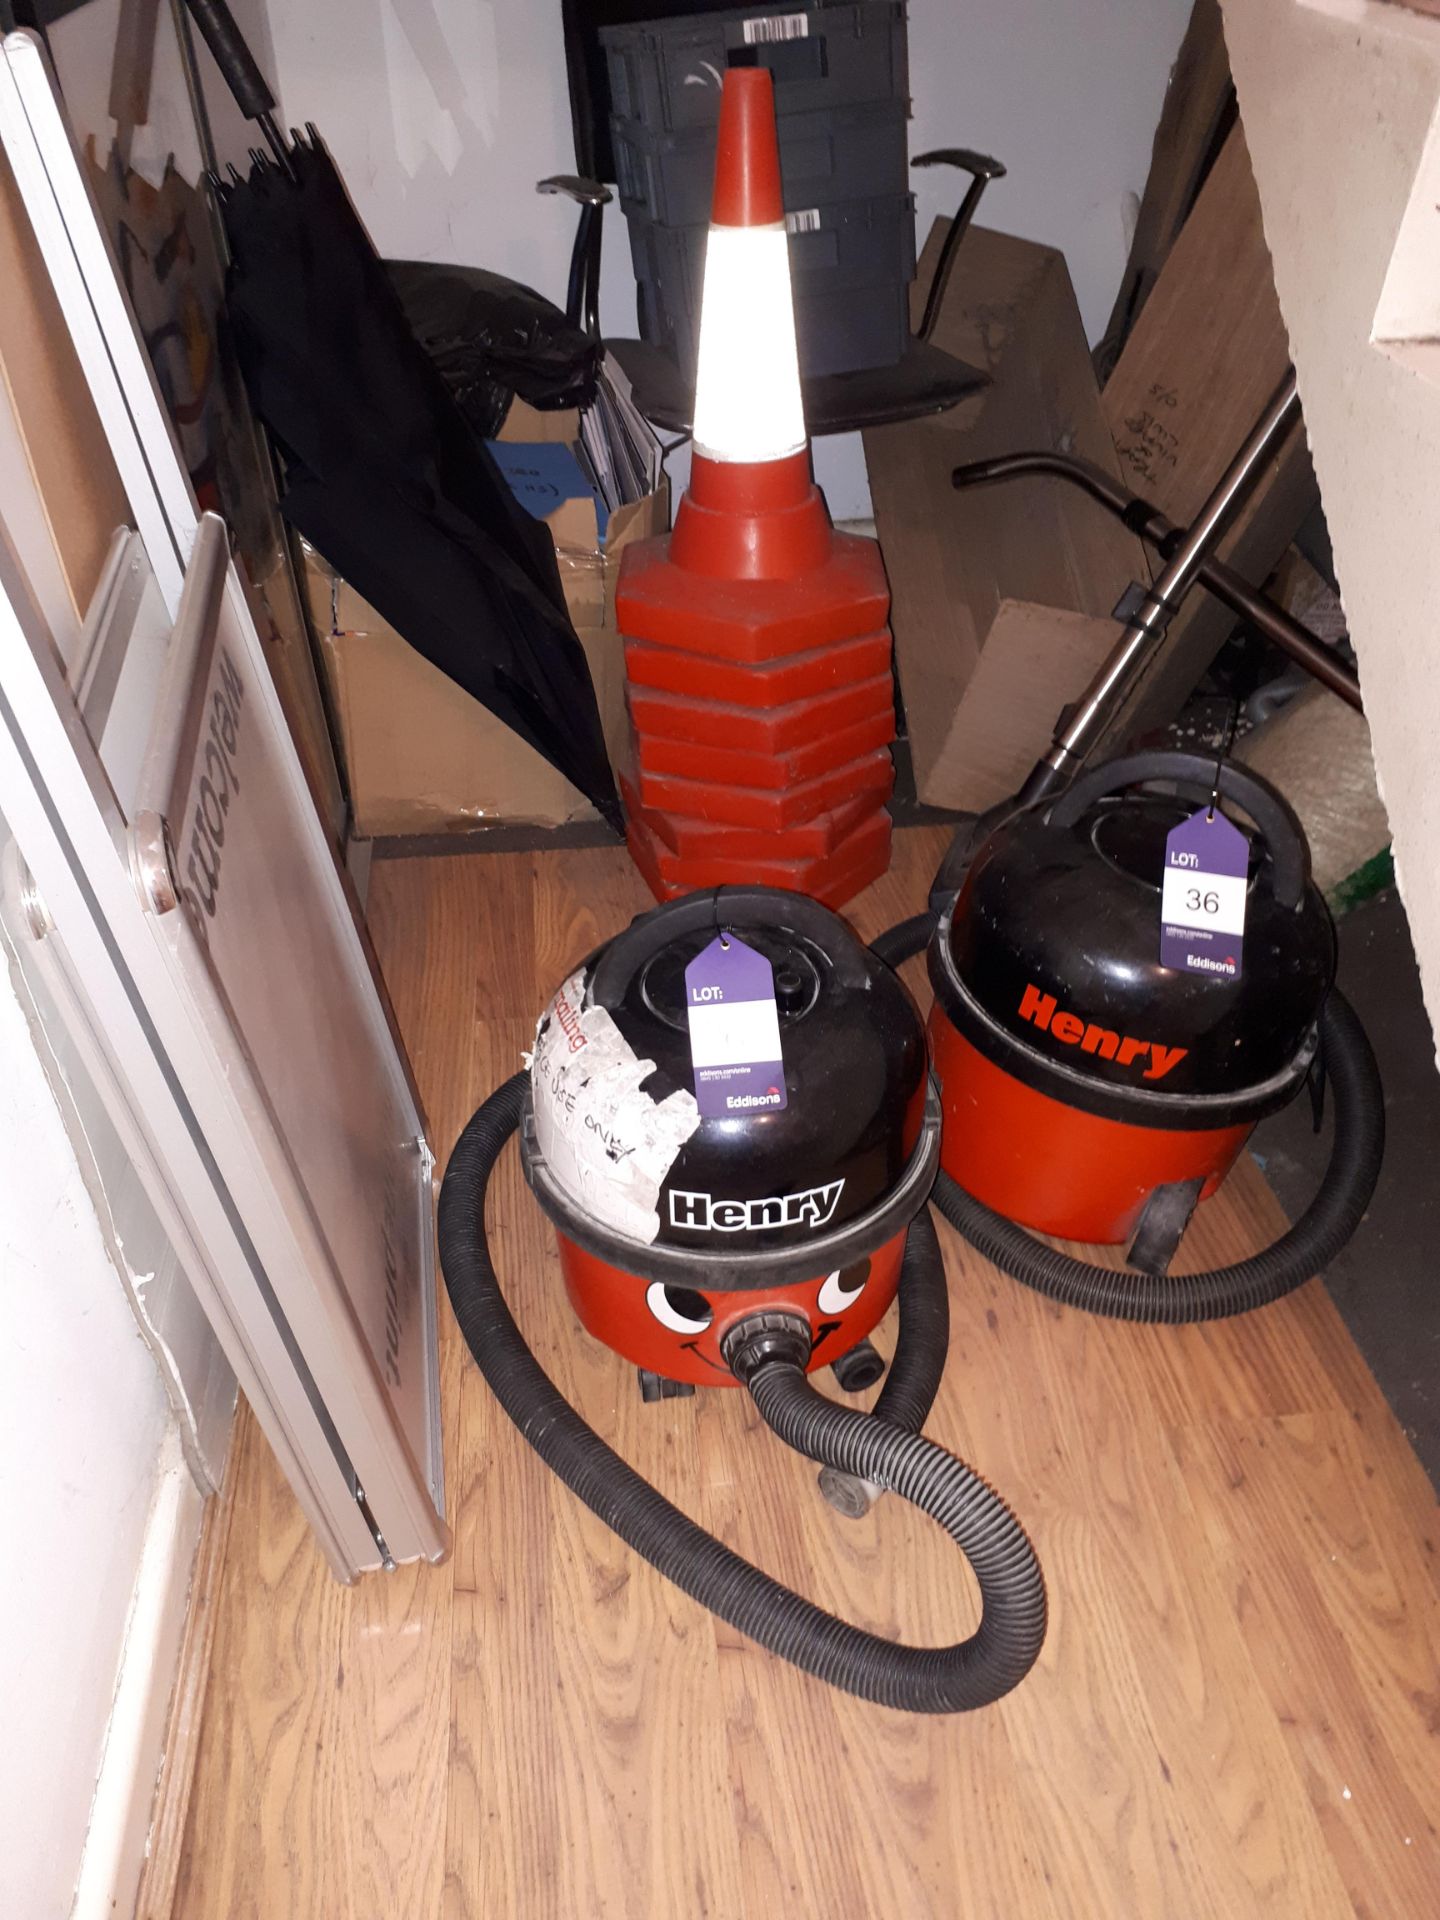 Two Numatic Henry Vacuum Cleaners, Eight Road Cones & Aluminium Sandwich Board